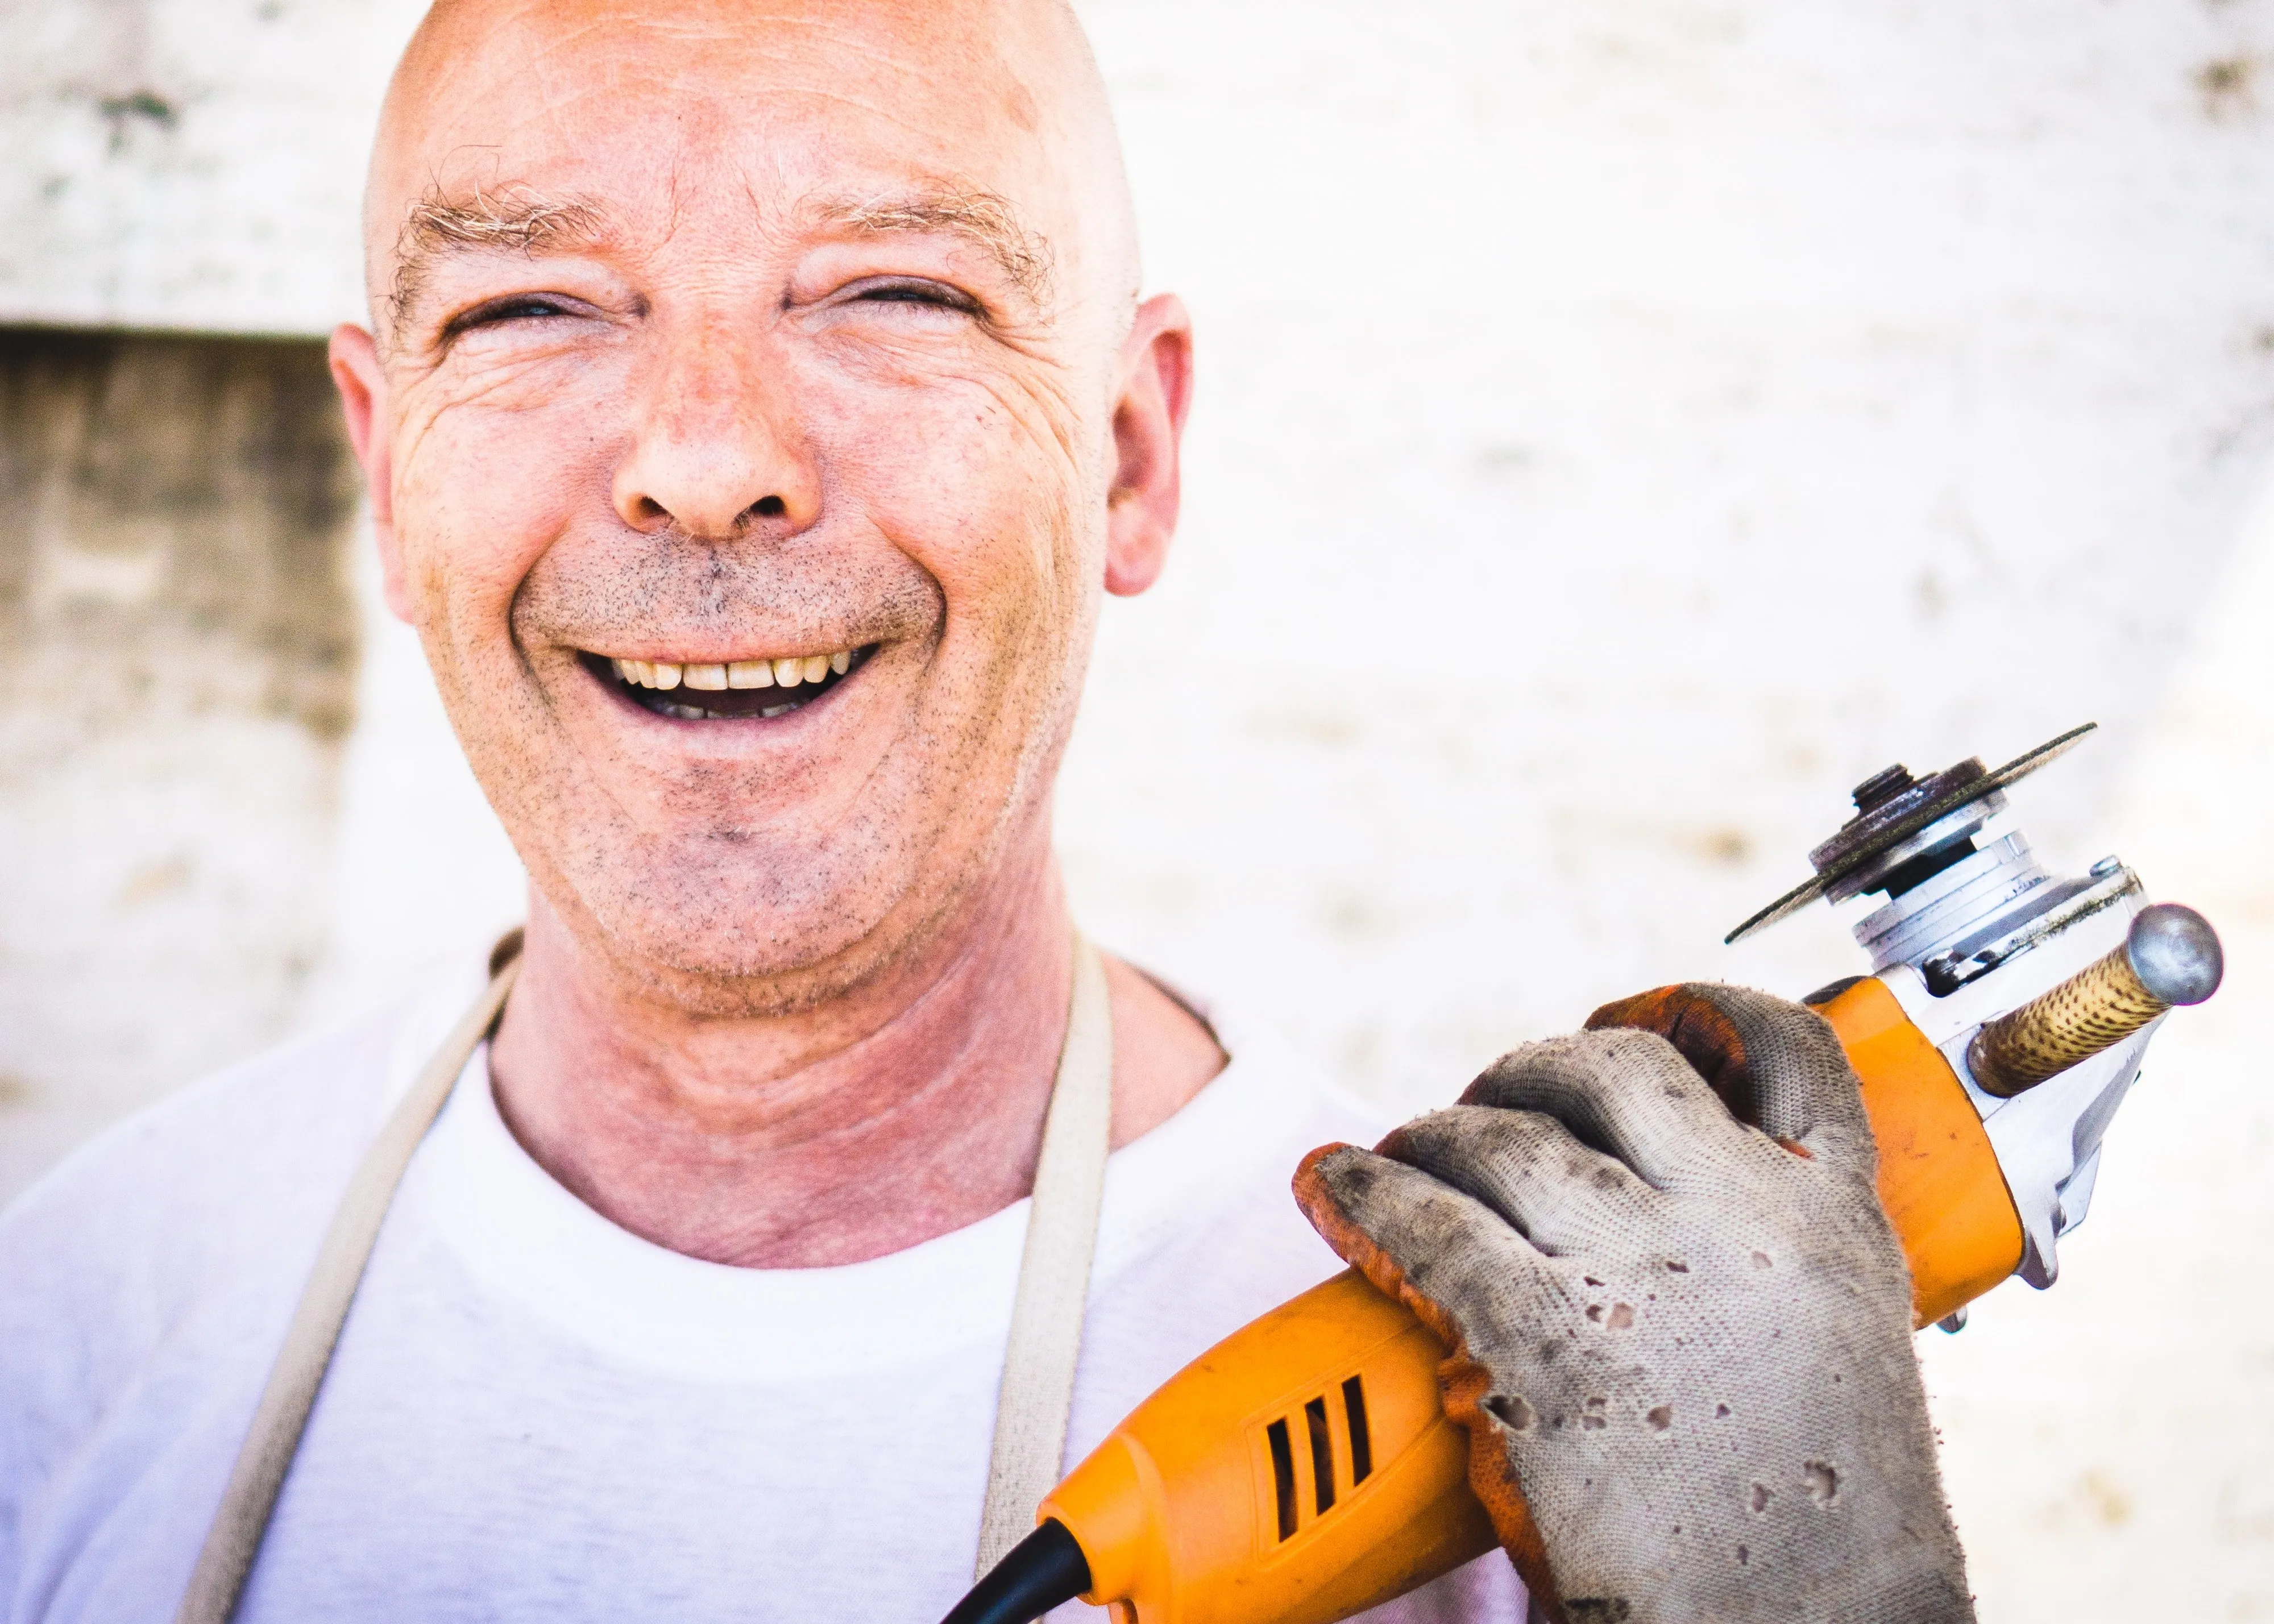 smiling older man with power drill